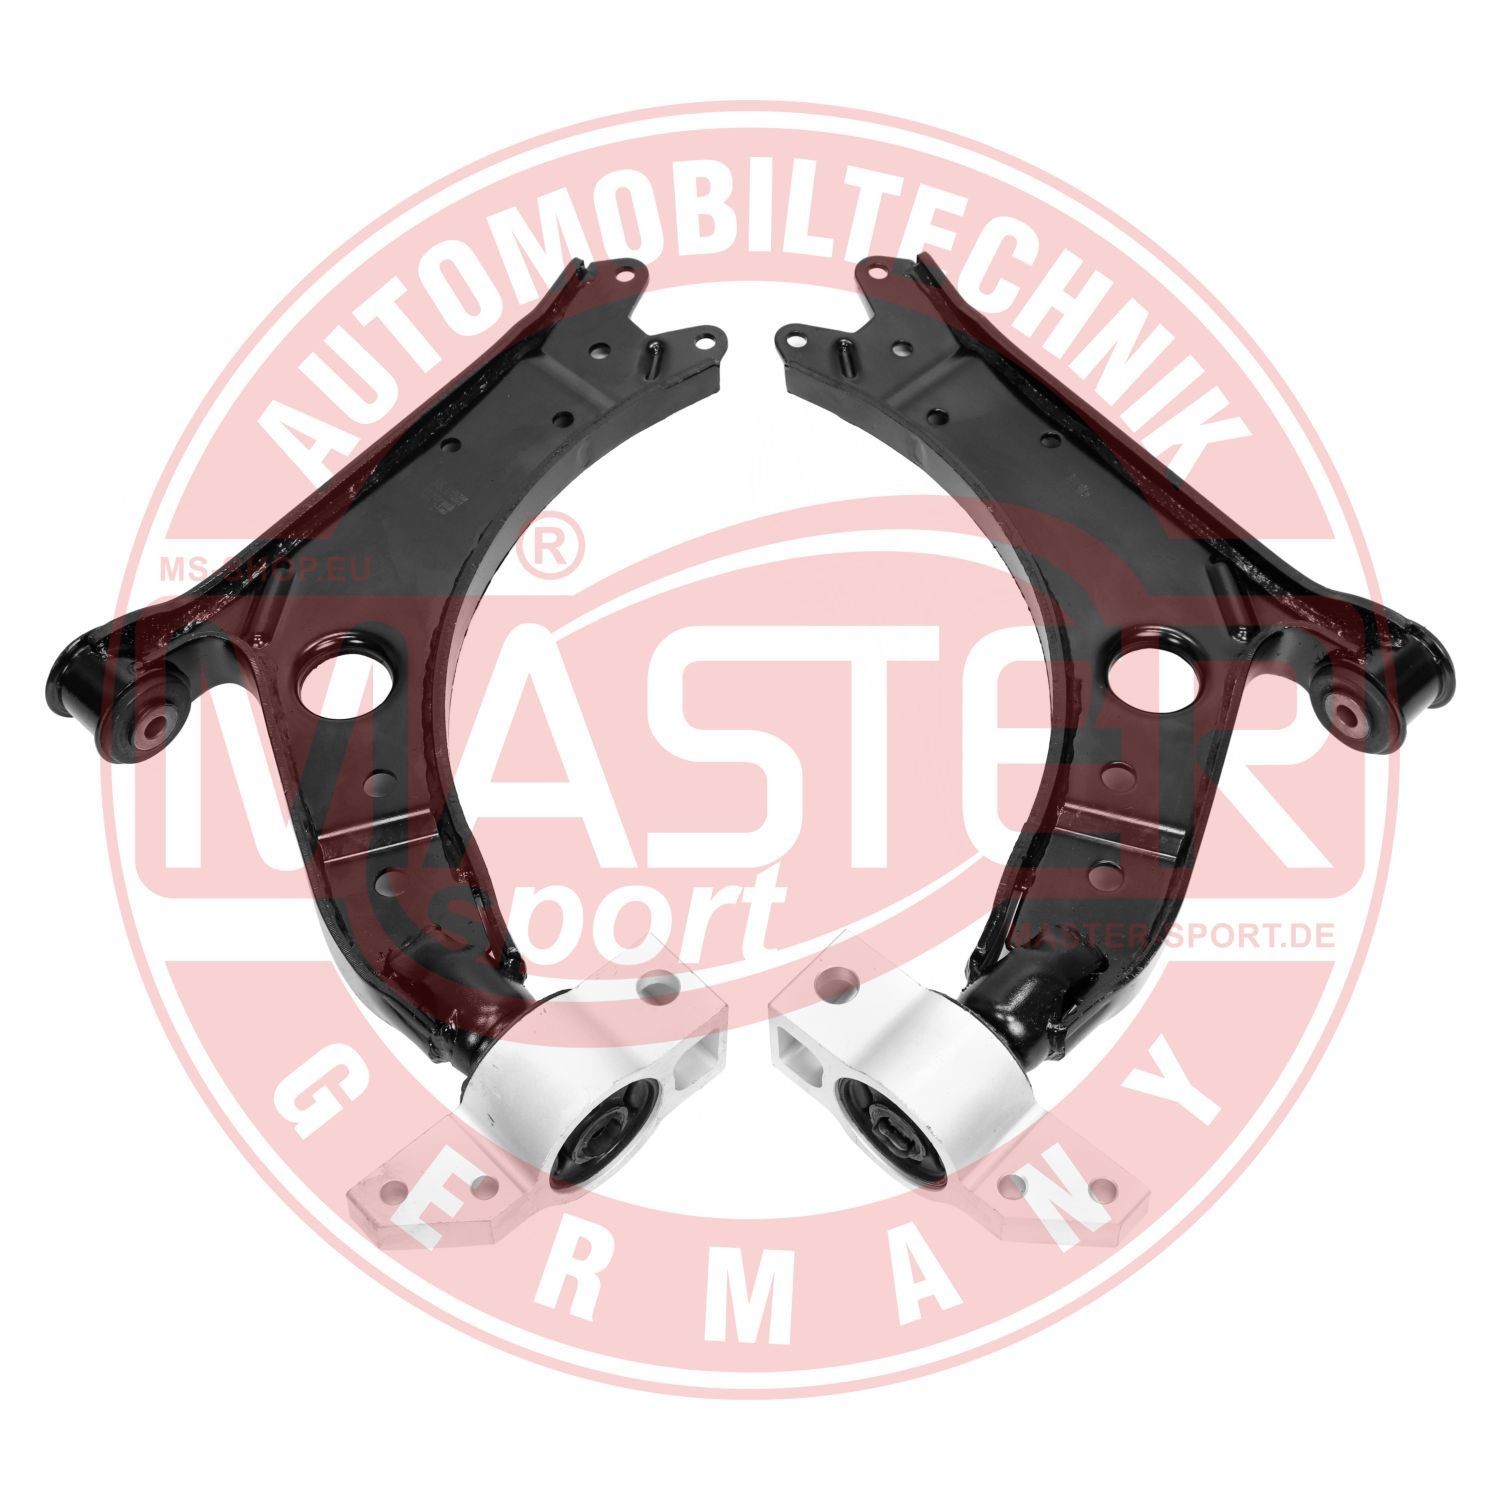 MASTER-SPORT Suspension arm kit rear and front VW Golf 6 Convertible new 36865/3-KIT-MS